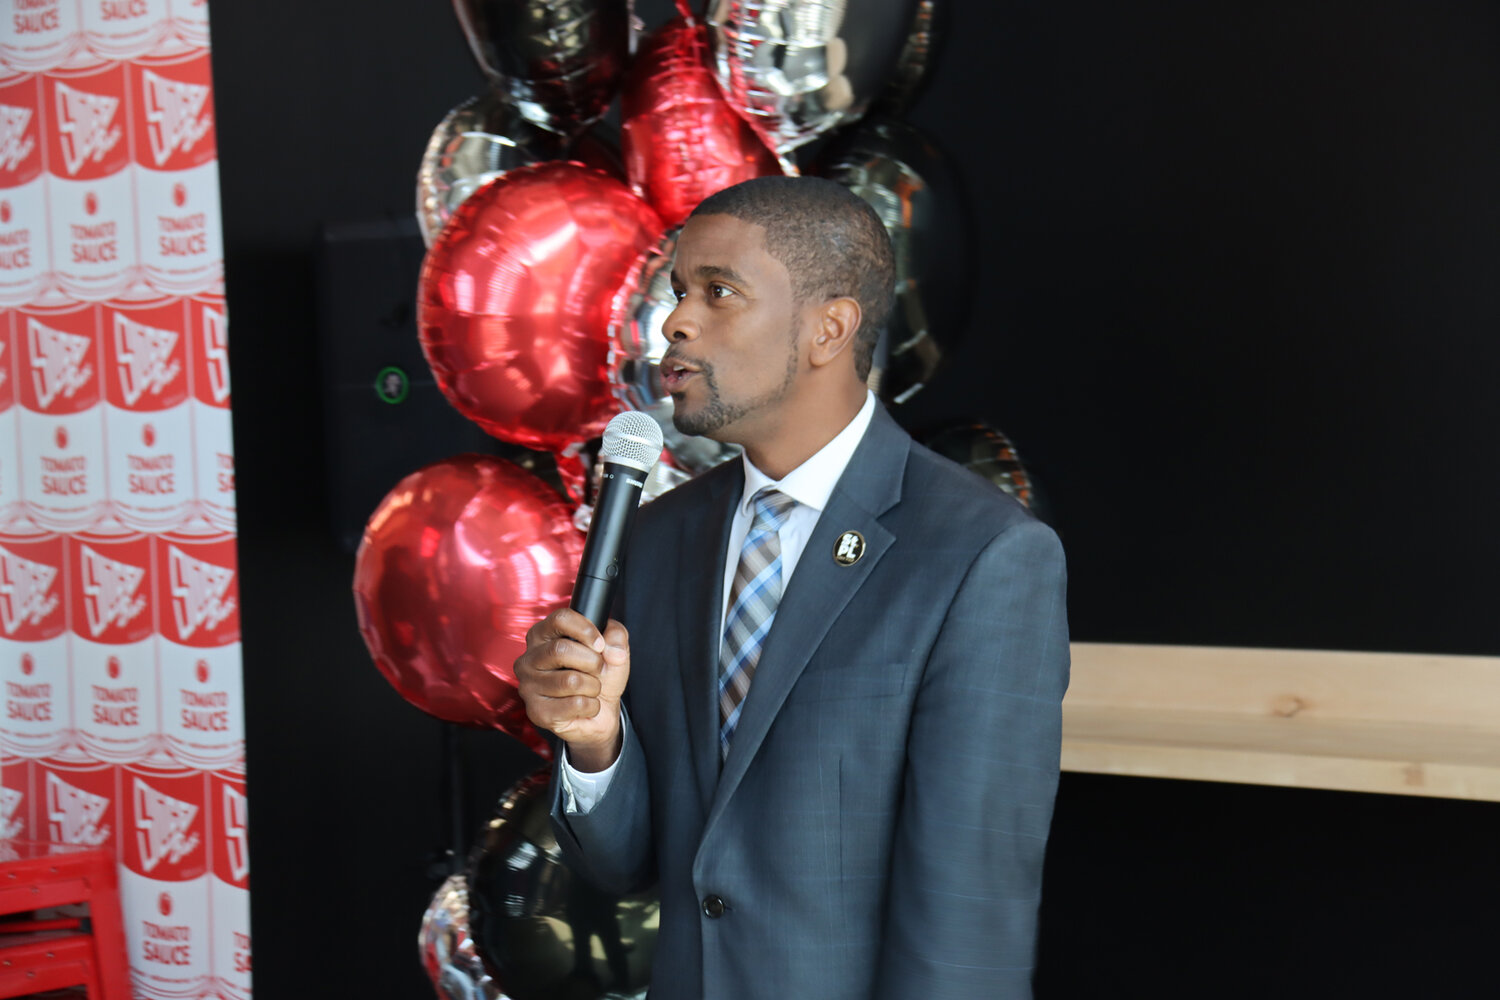 “We’ve been looking forward to this for a long time,” stated Mayor Melvin Carter, who grew up in the neighborhood. He observed that during his campaign, people told him the city needs to do better at Dale and University. “Let me tell you, we are doing better,” he said.  (Photo by Tesha M. Christensen)